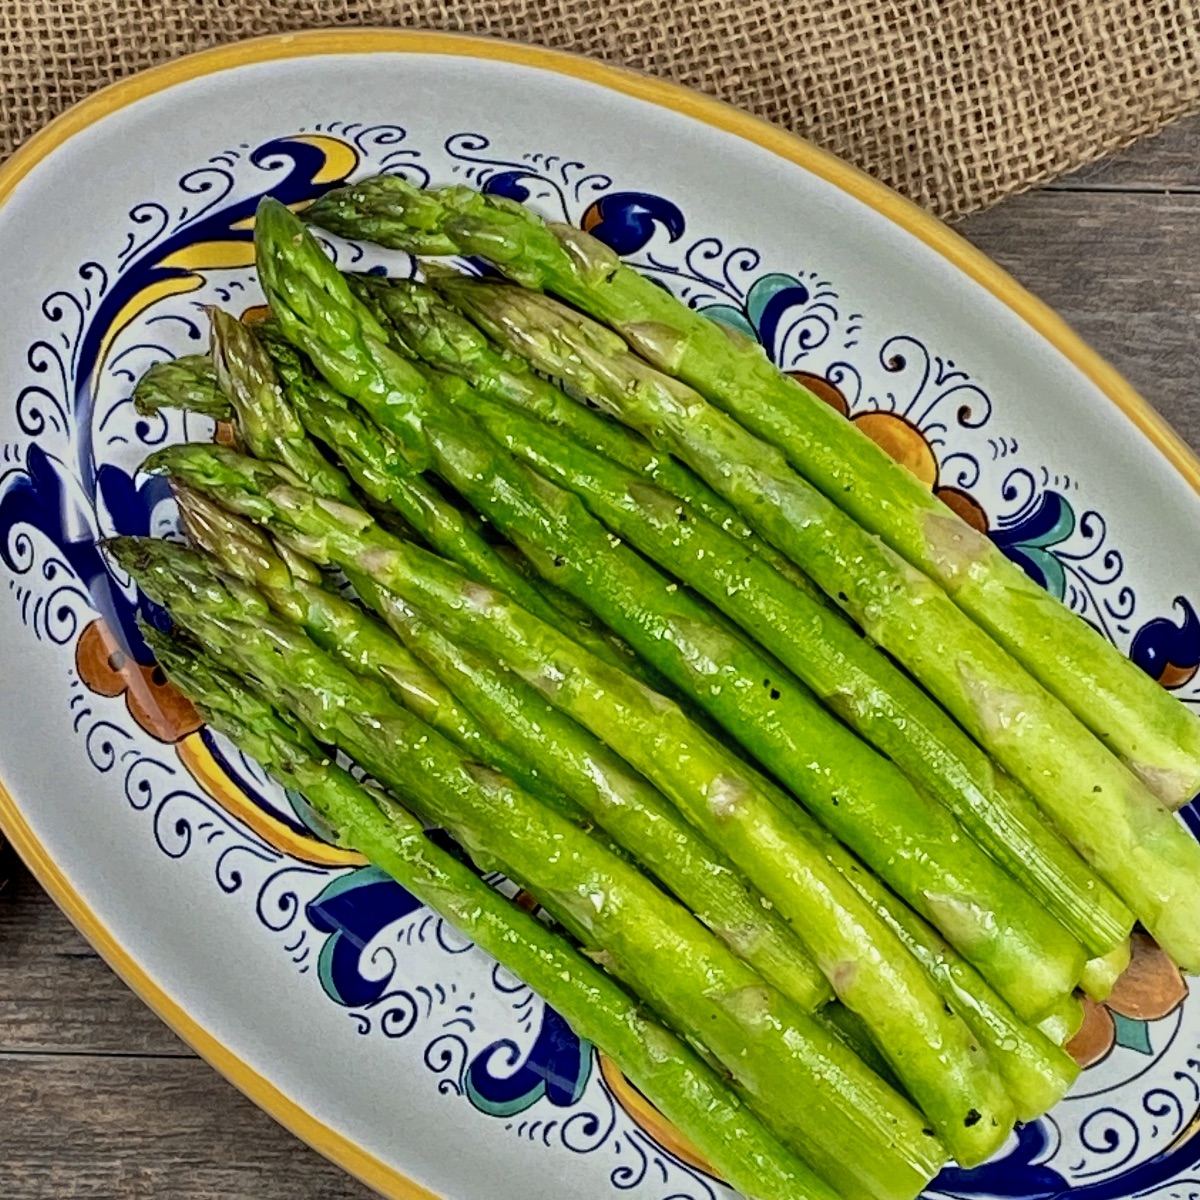 A platter of Microwave Asparagus, ready to serve.